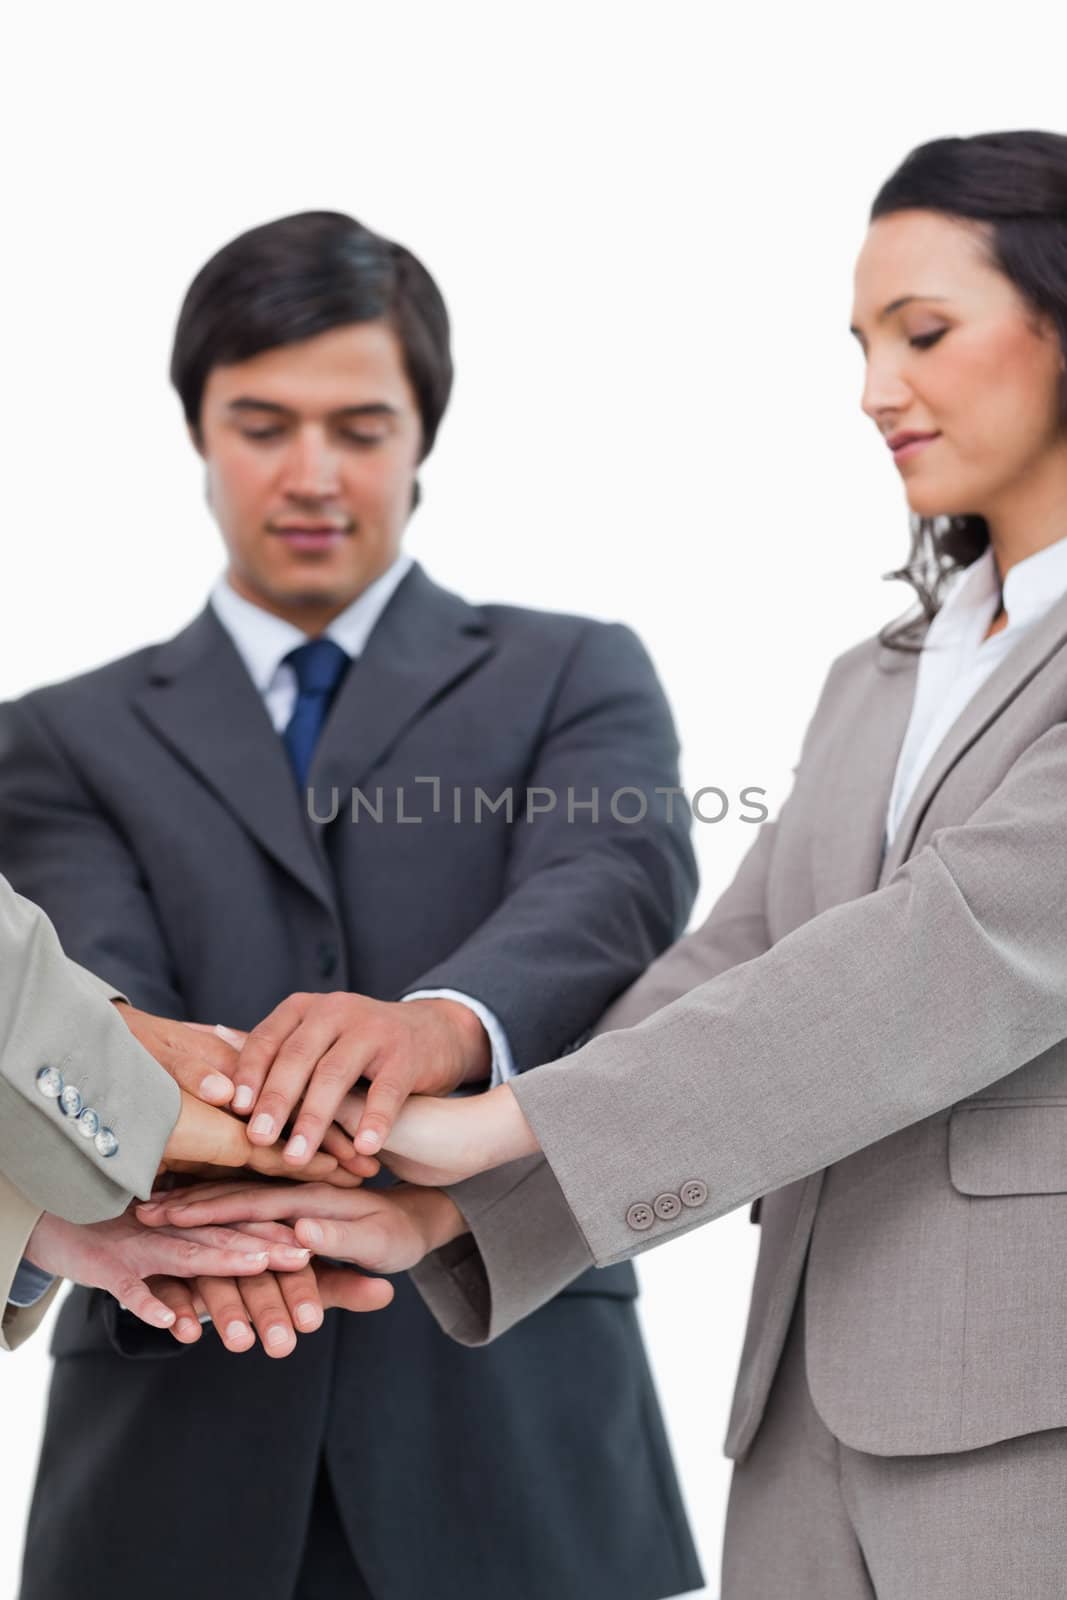 Hands of businesspeople forming a pile against a white background